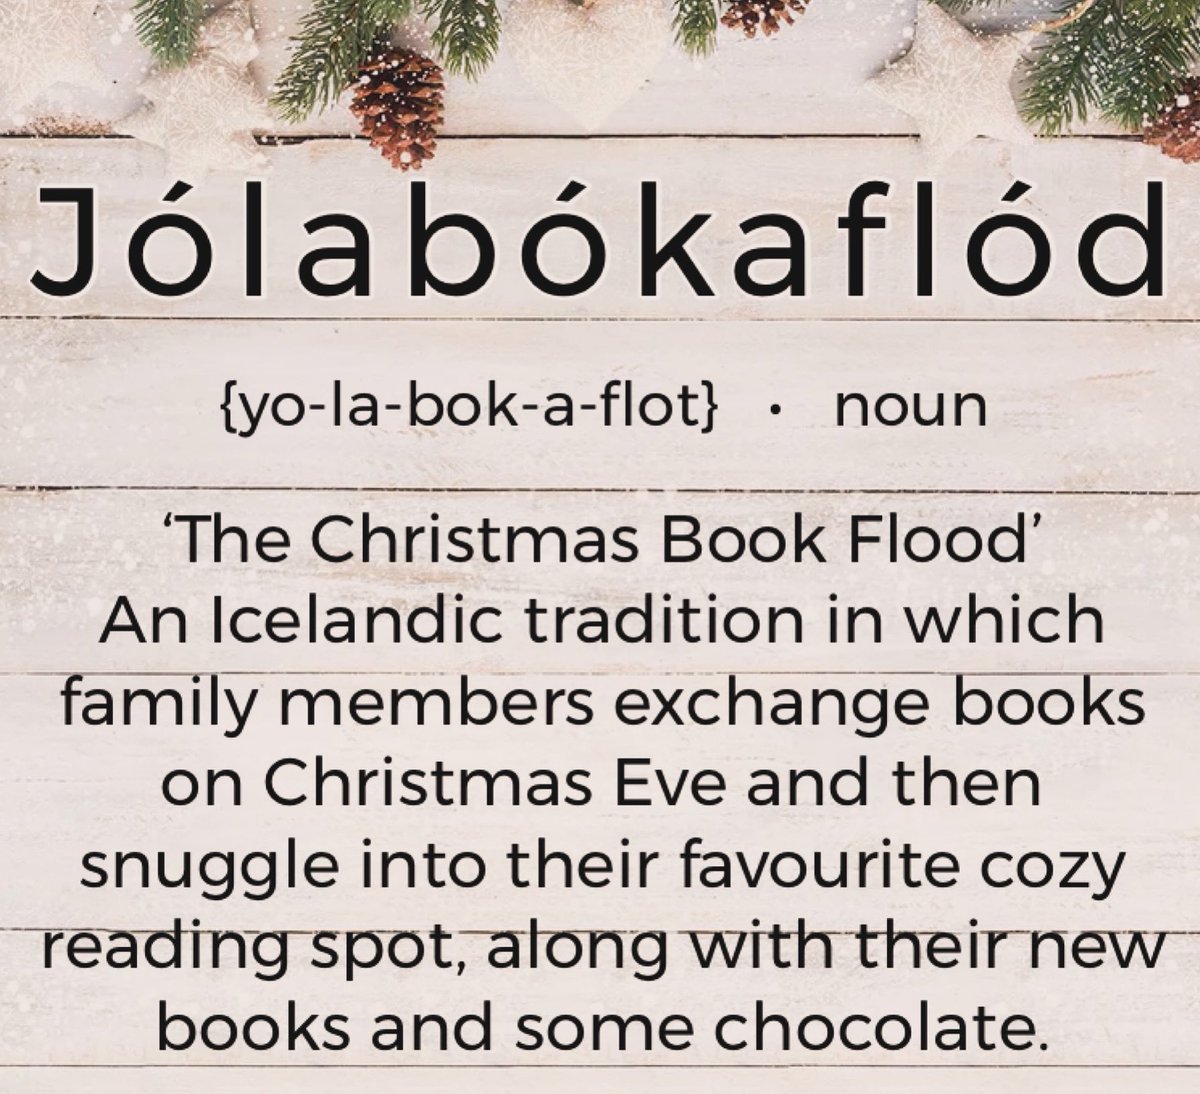 Jólabókaflód. We are all on board with this lovely Icelandic tradition in our family! 🎄📚🍫